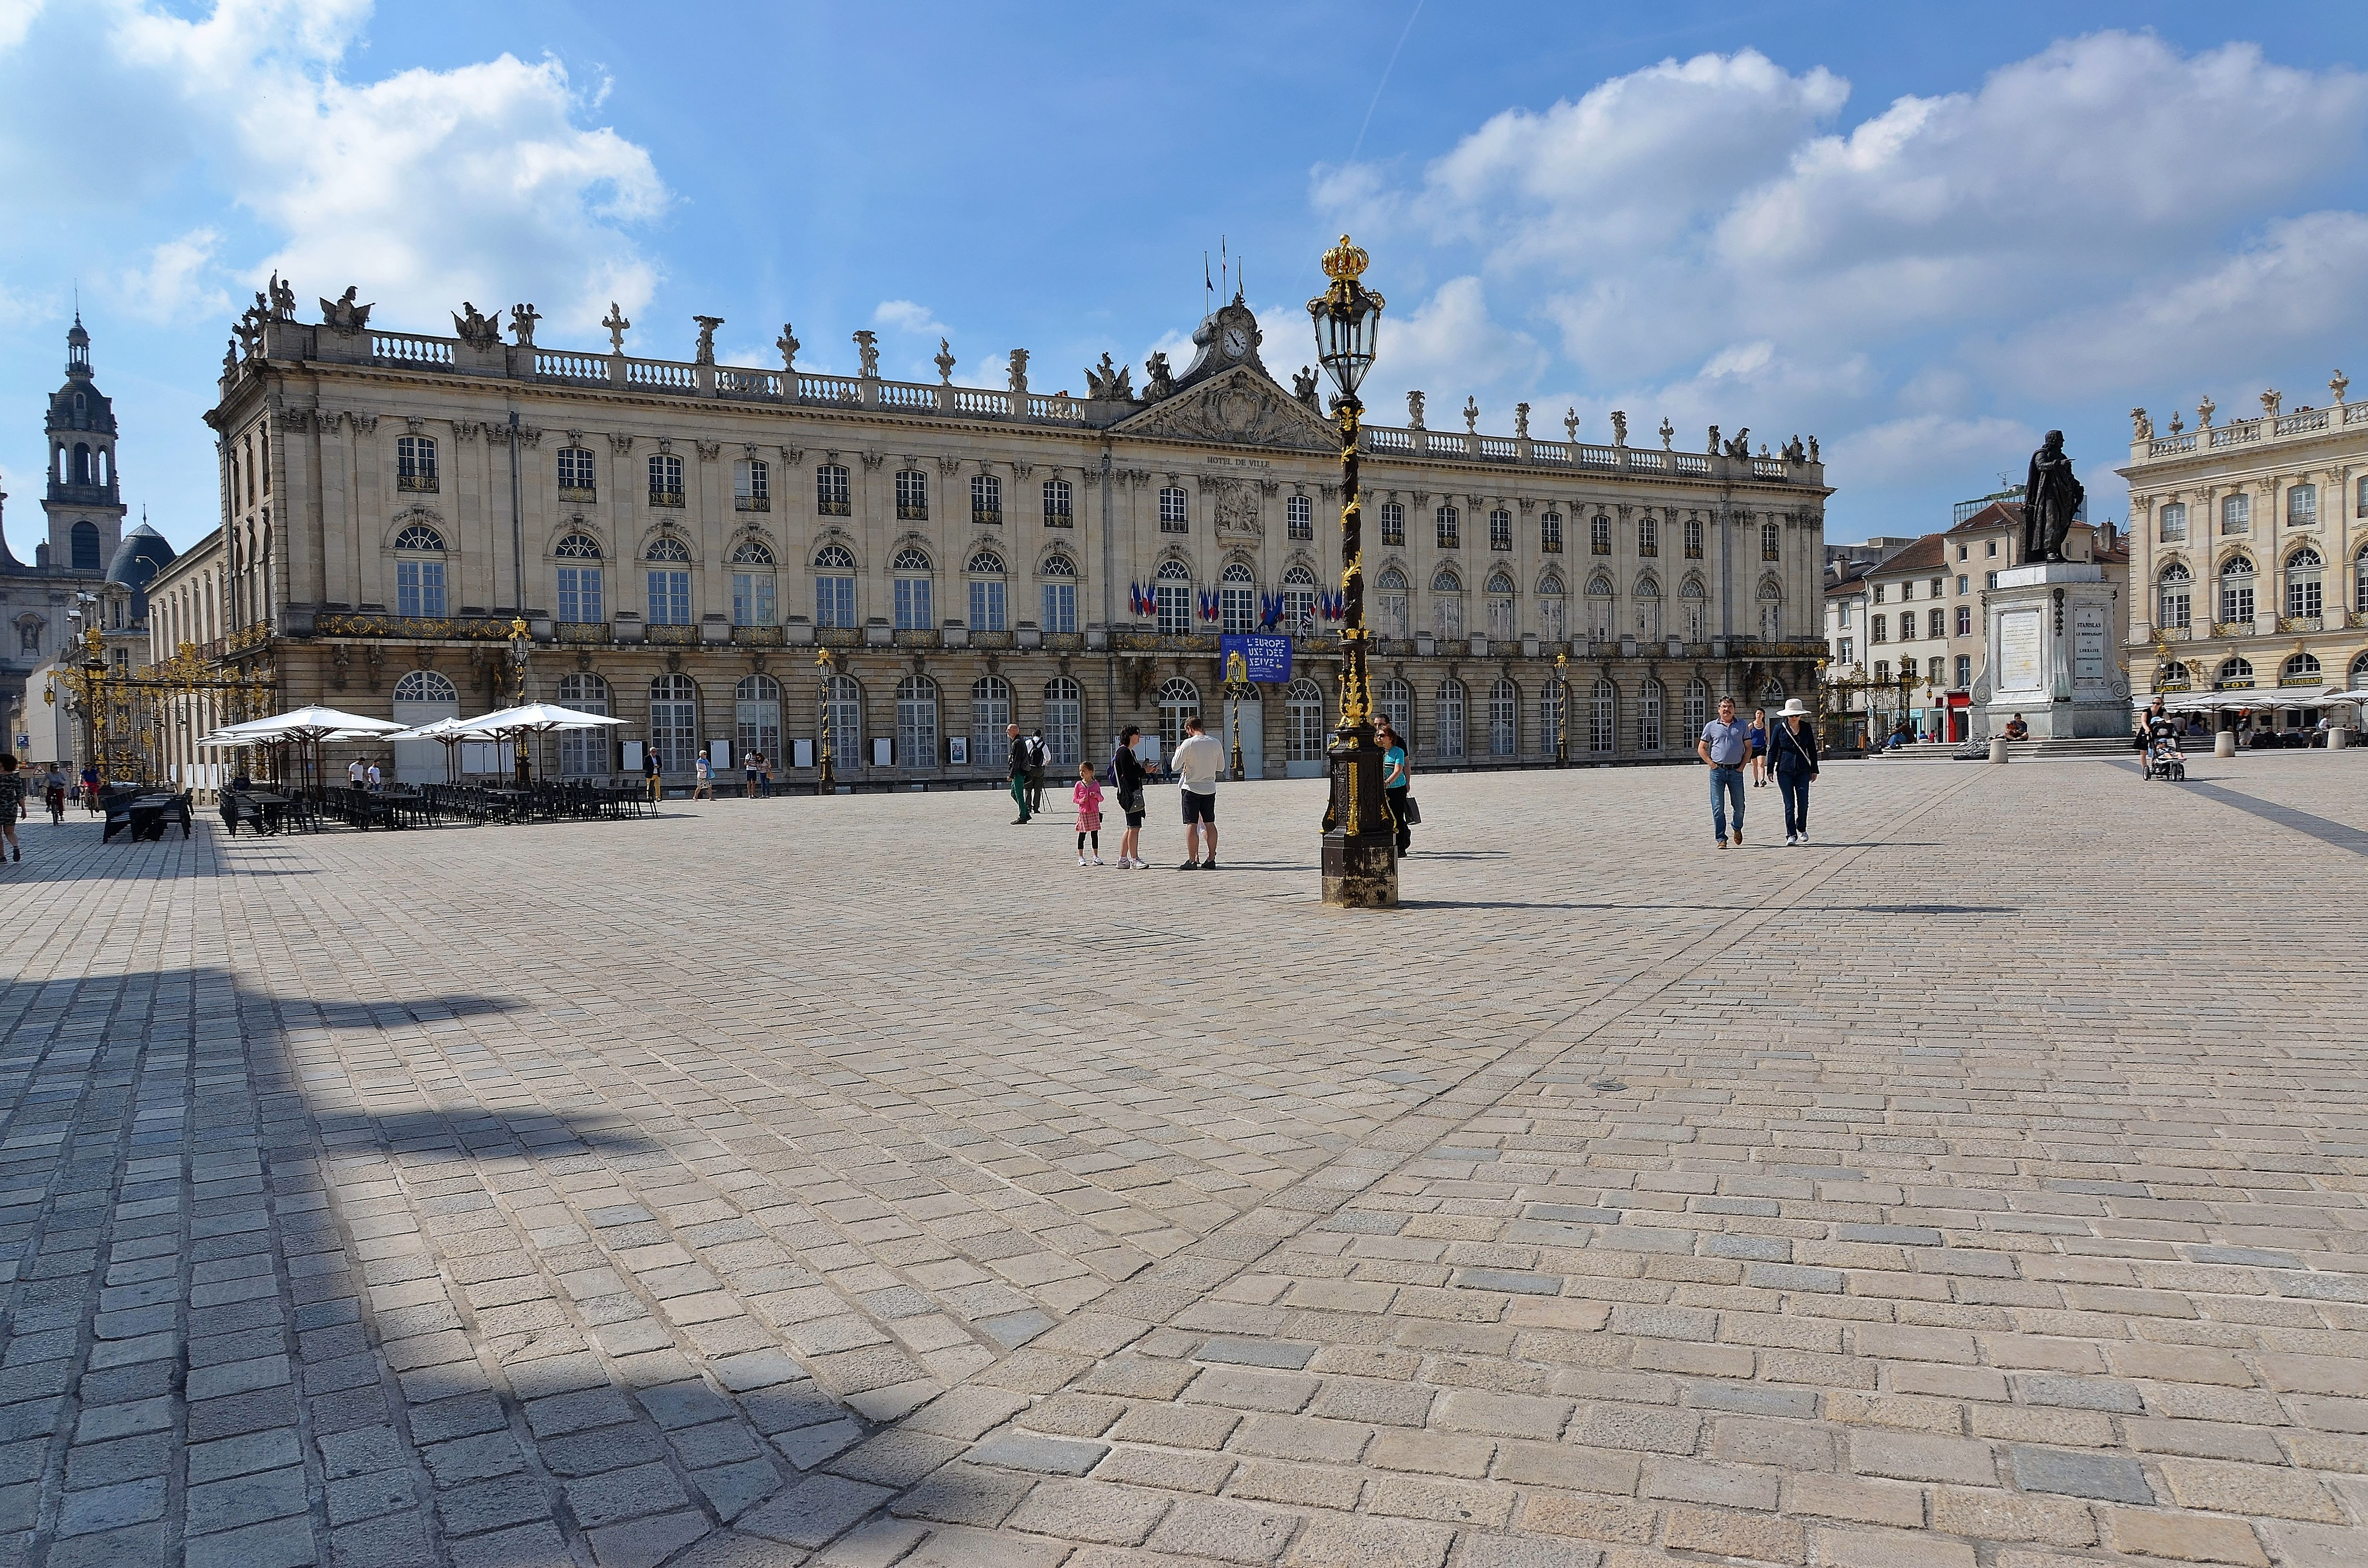 Stadhuis en Place Stanislas (Wikimedia Commons: Patrick from Compiègne, France https://commons.wikimedia.org/w/index.php?curid=122145638)